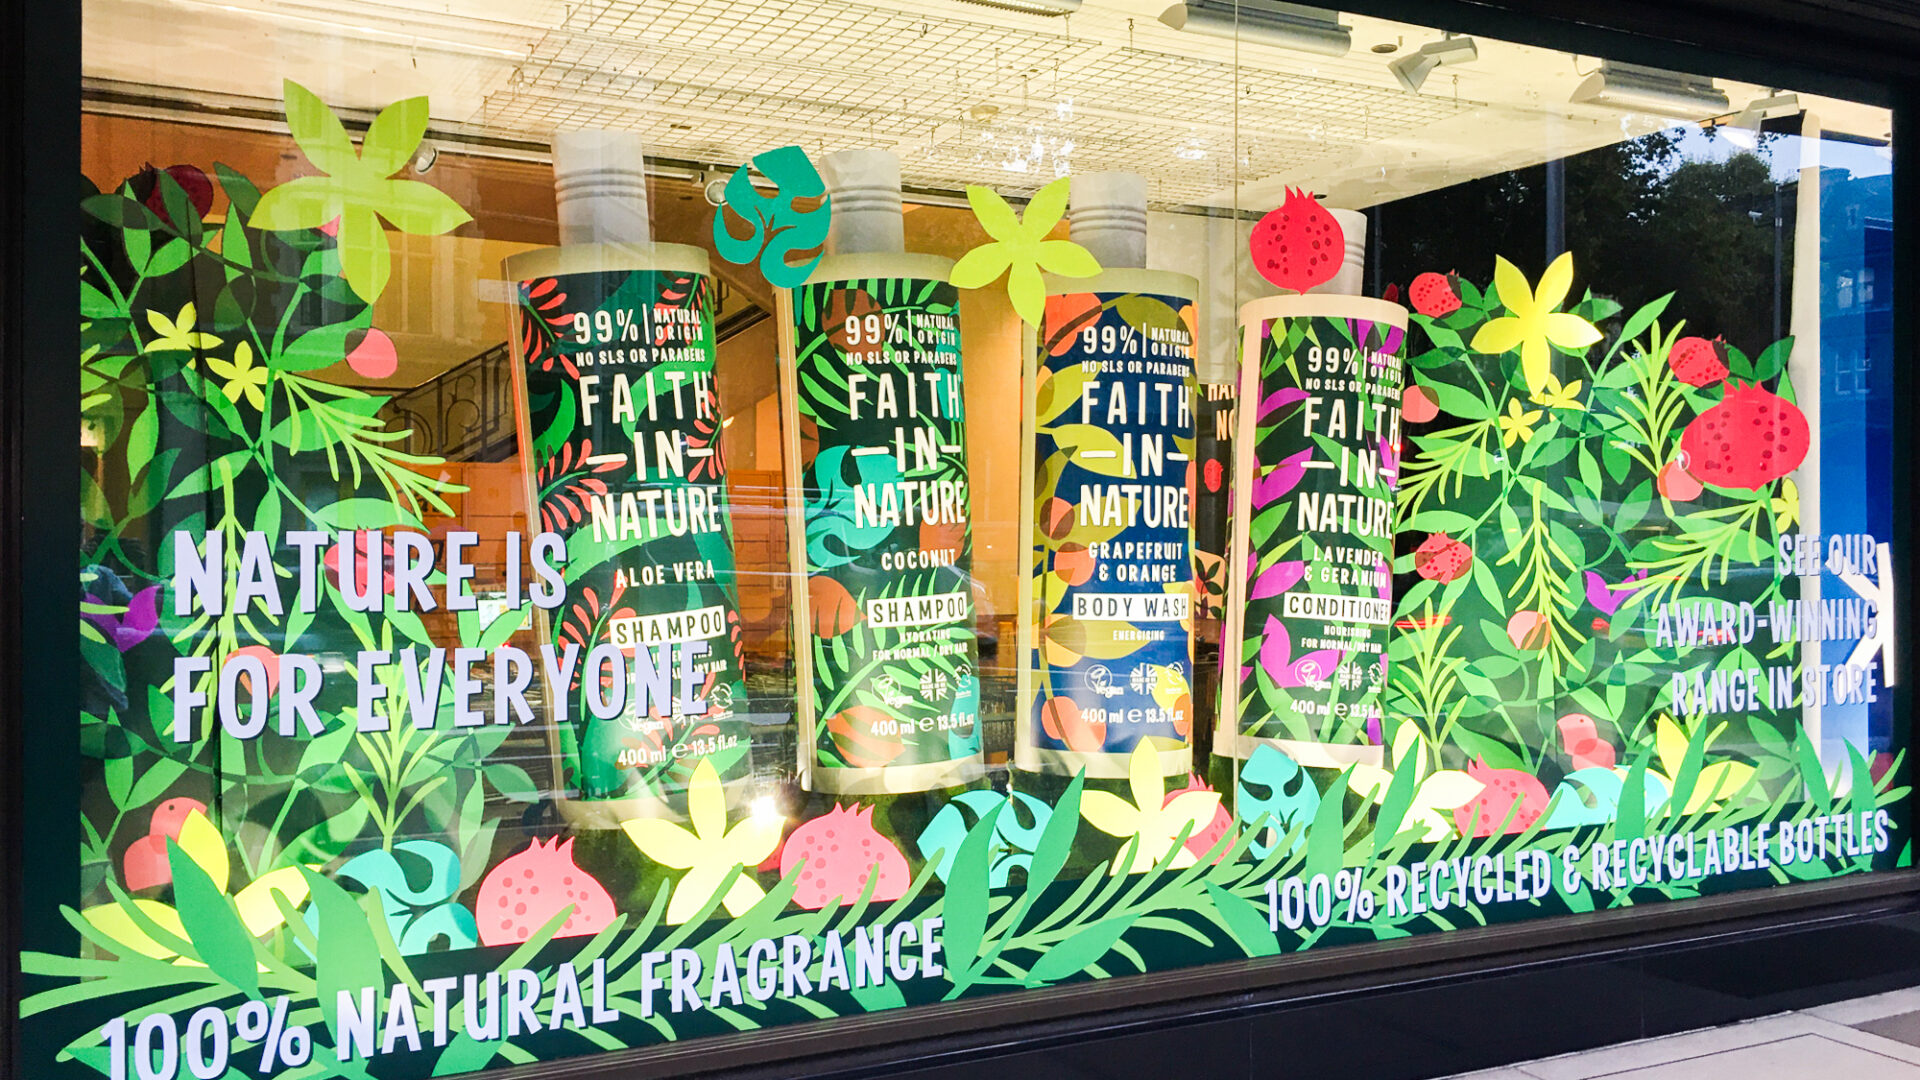 Faith In Nature - Window Display - Whole Foods Market